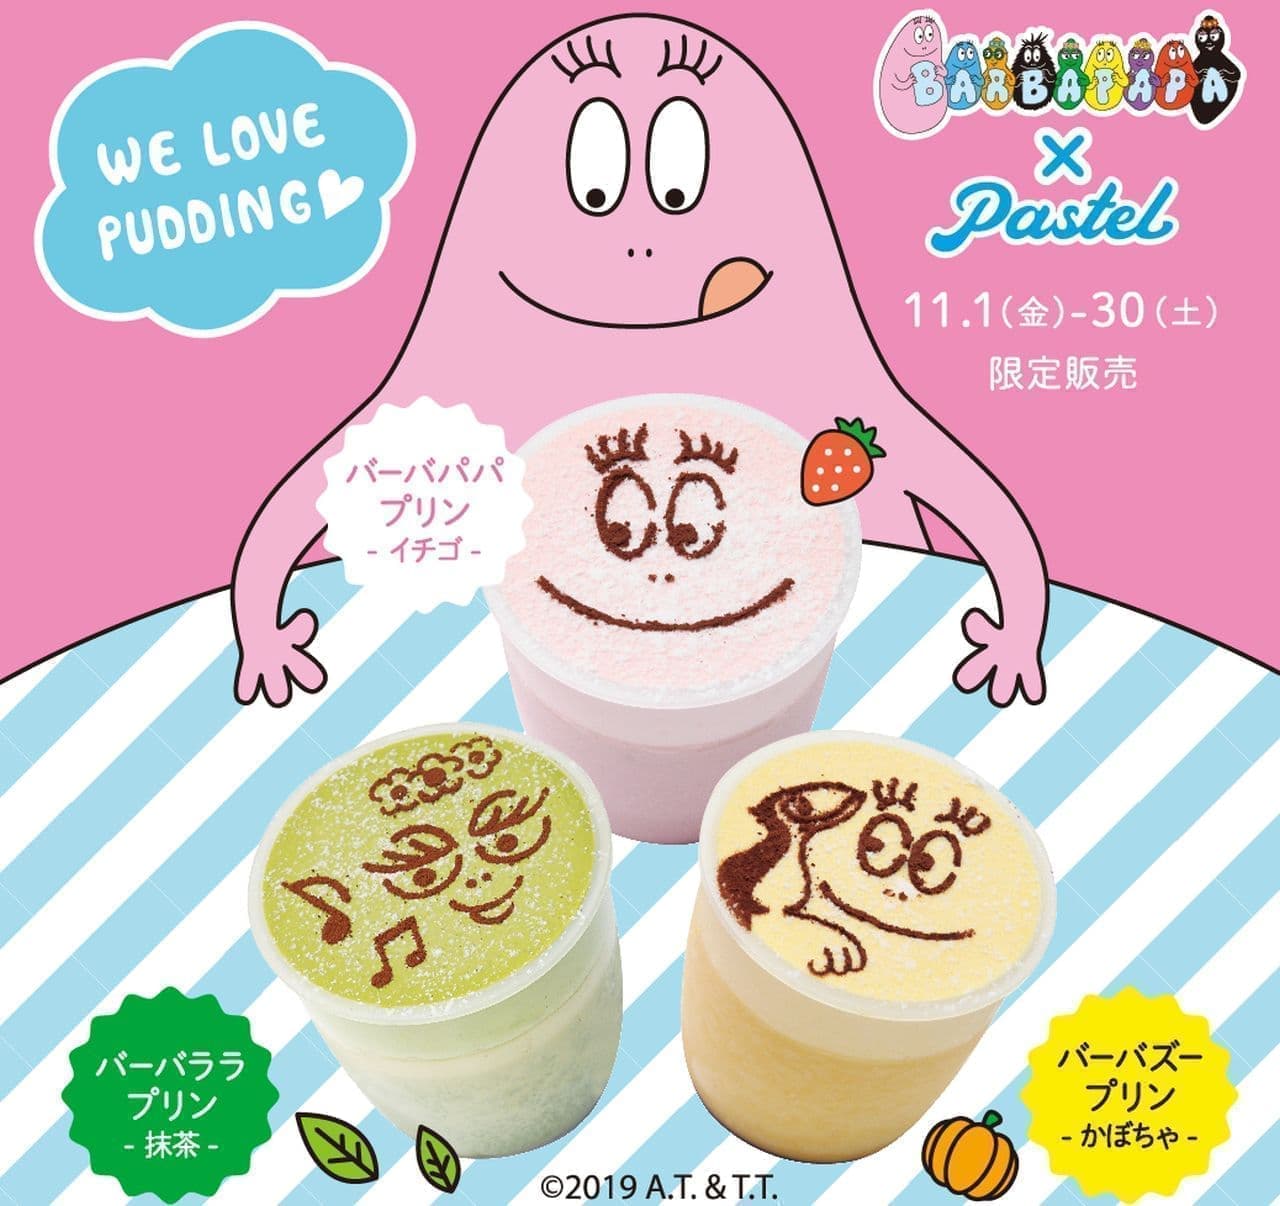 Collaboration pudding with "Barbapapa" in pastel